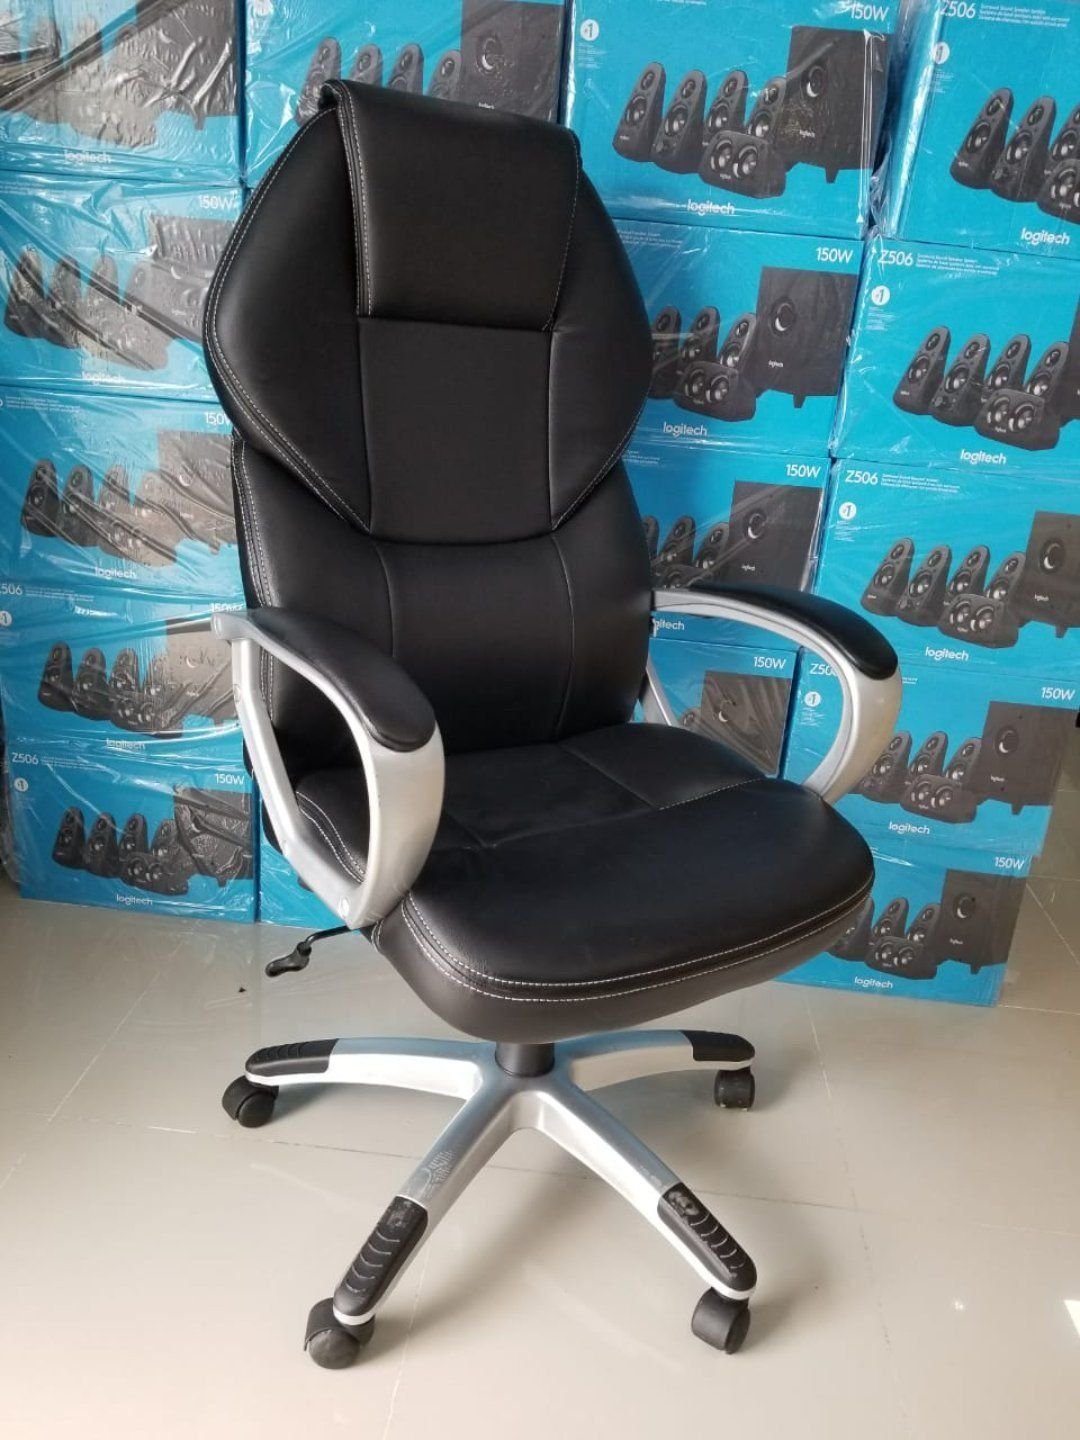 equipos profesionales - Sillon ejecutivo montpellier